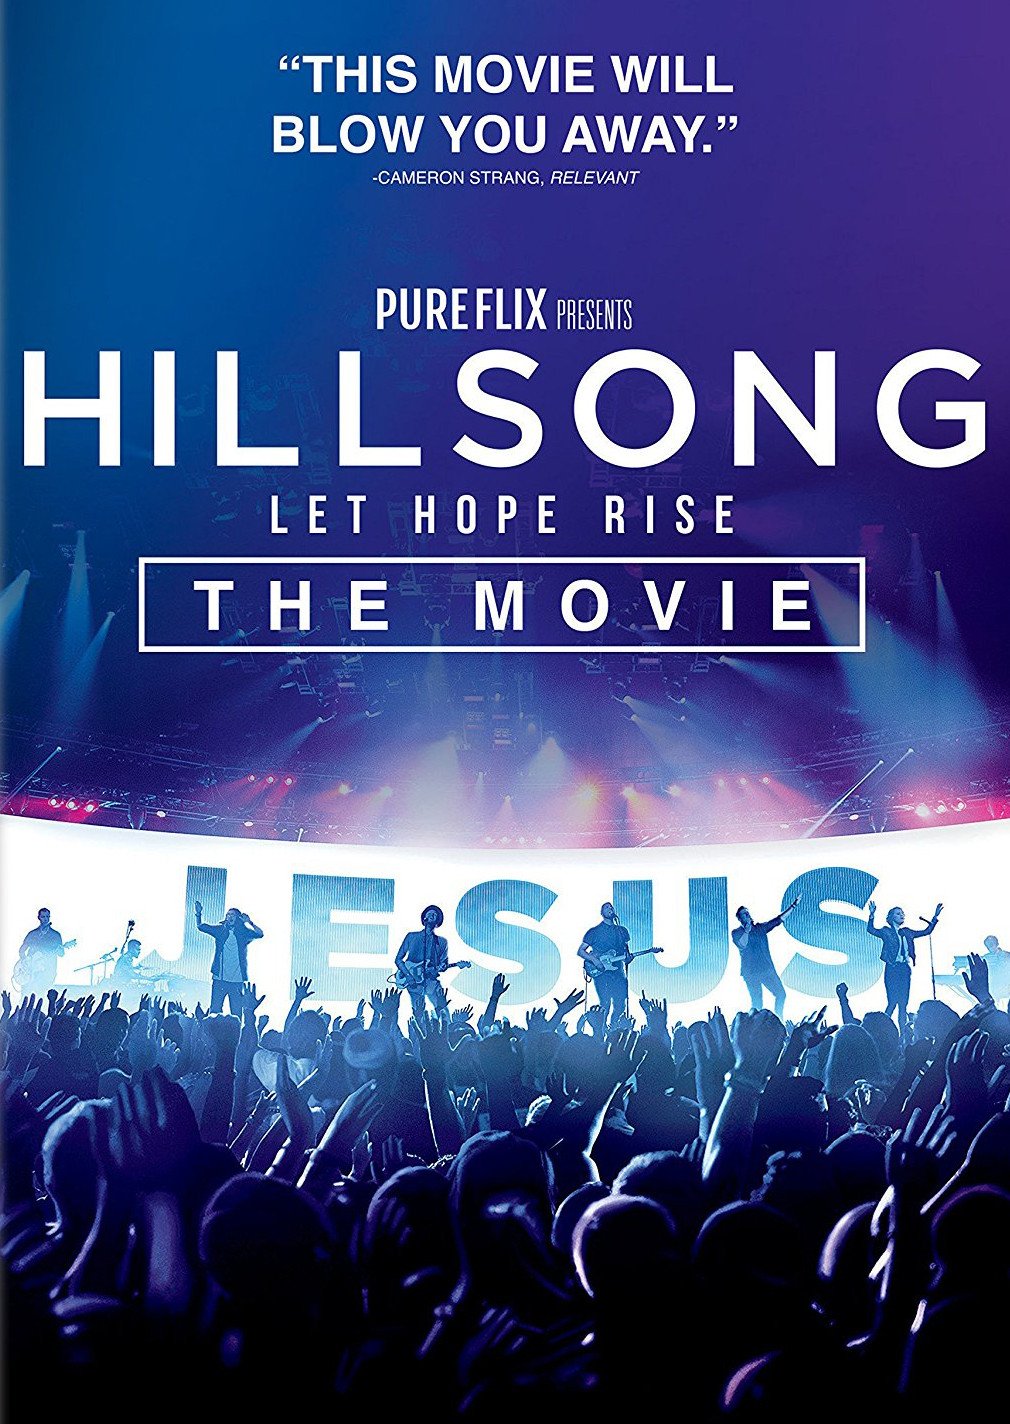 More information on Let Hope Rise Hillsong The Movie